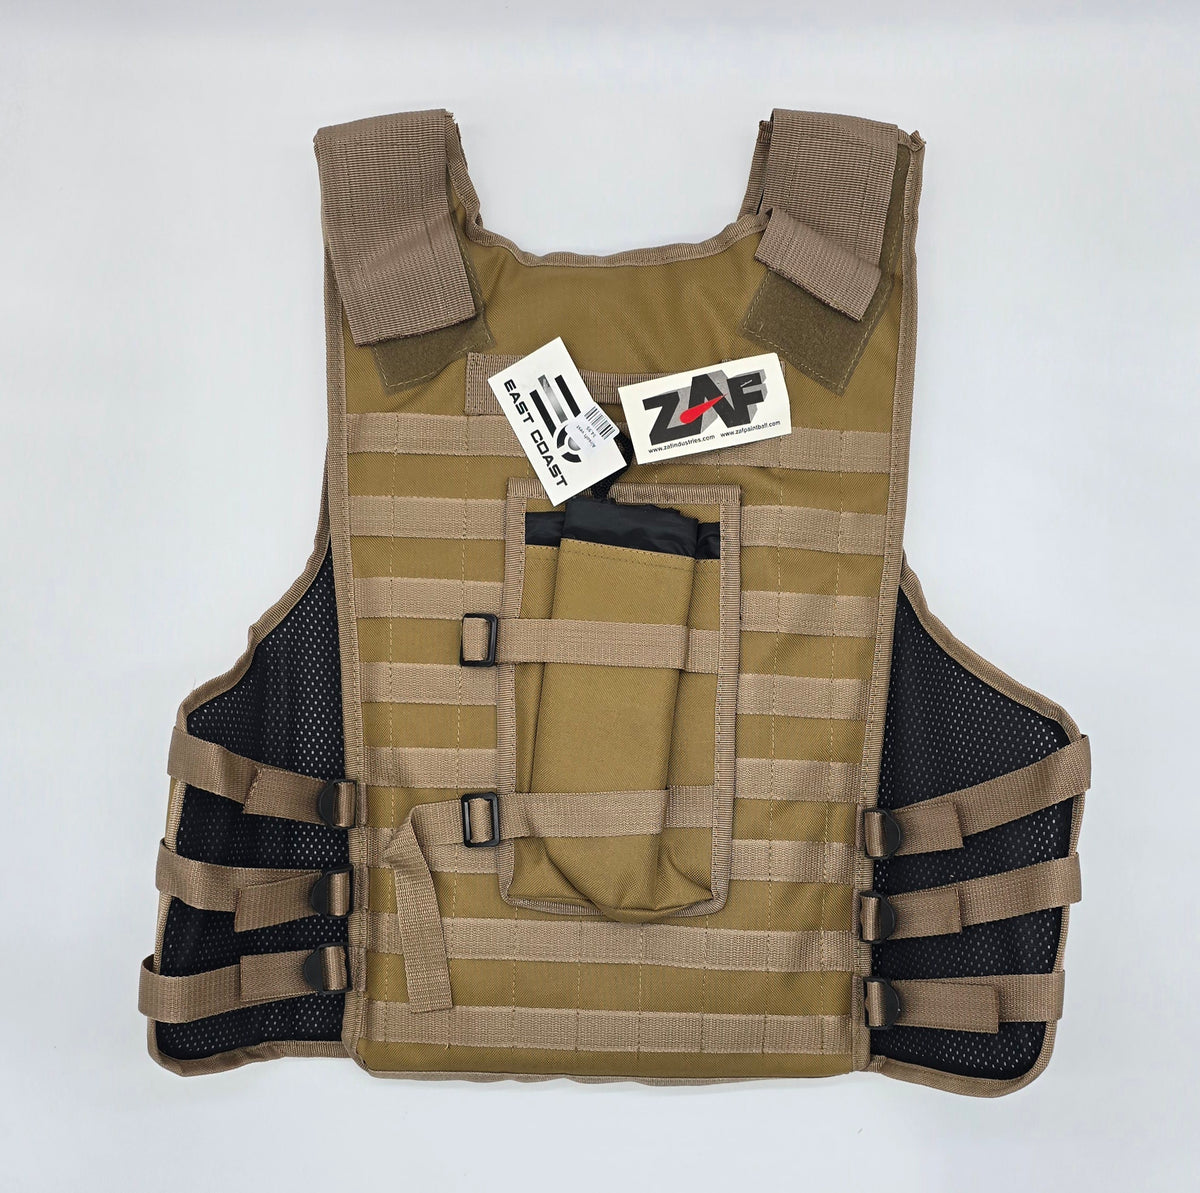 East Coast Tactical Airsoft Vest | Fully Adjustable | Color: Tan